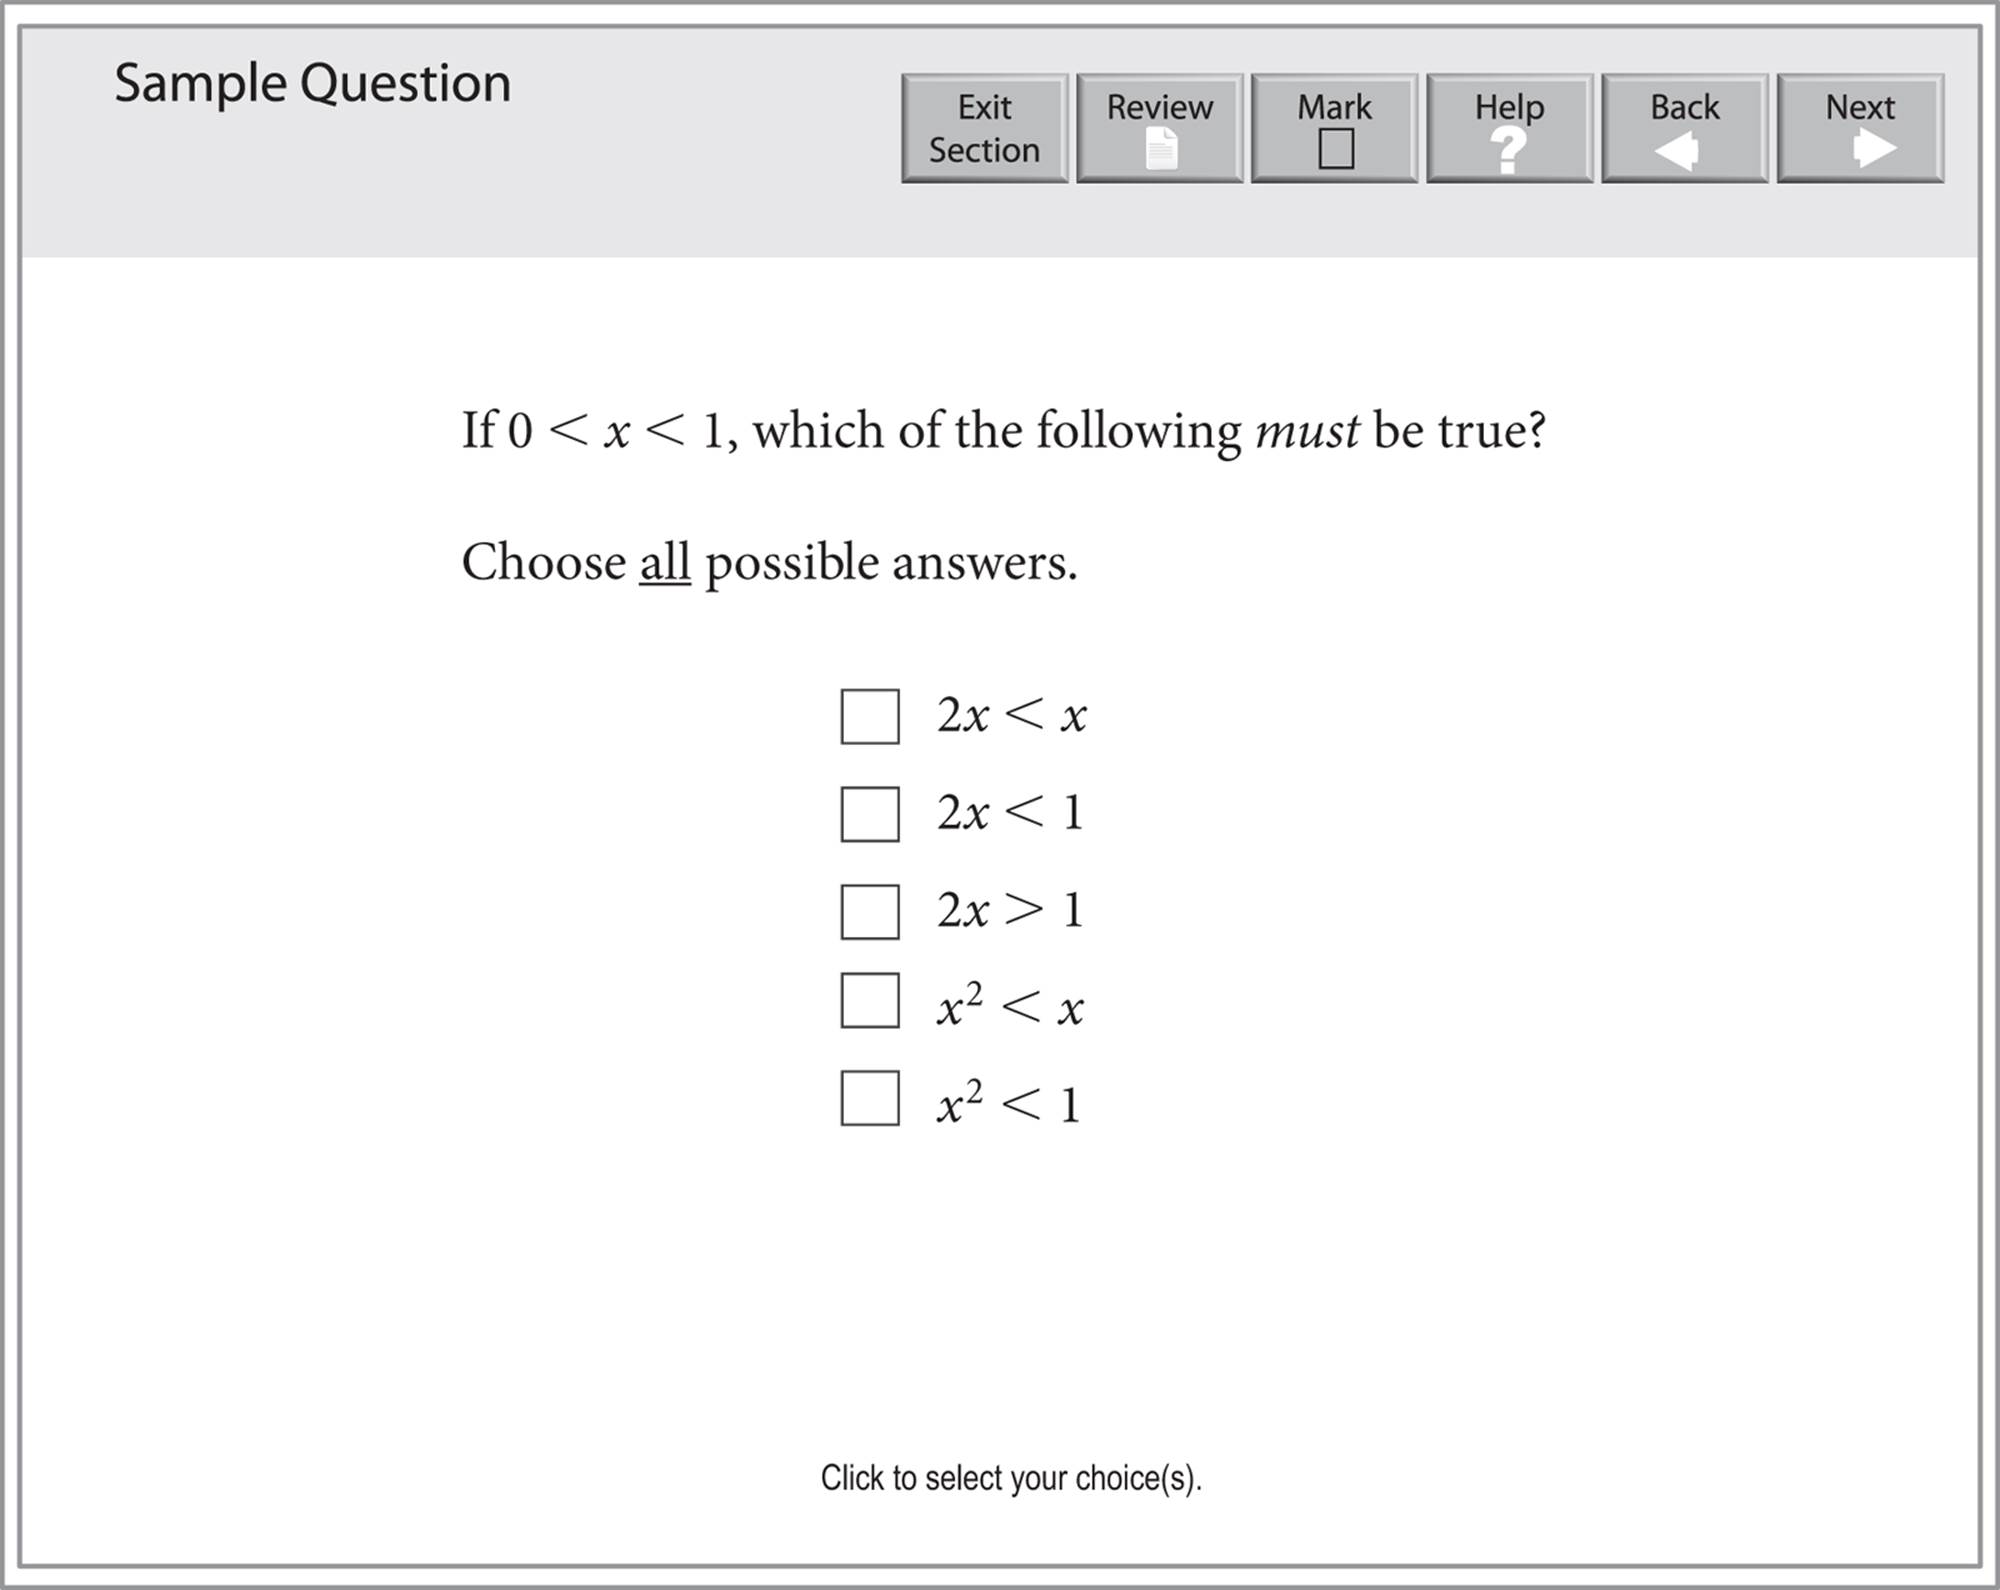 A problem solving question: "If x is greater than 0 but less than 1, which of the following must be true?" There are five choices for the answer, with instructions to choose all possible answers: 2x is less than x, 2x is less than 1, 2x is greater than 1, x2 is less than x, and x2 is less than 1.